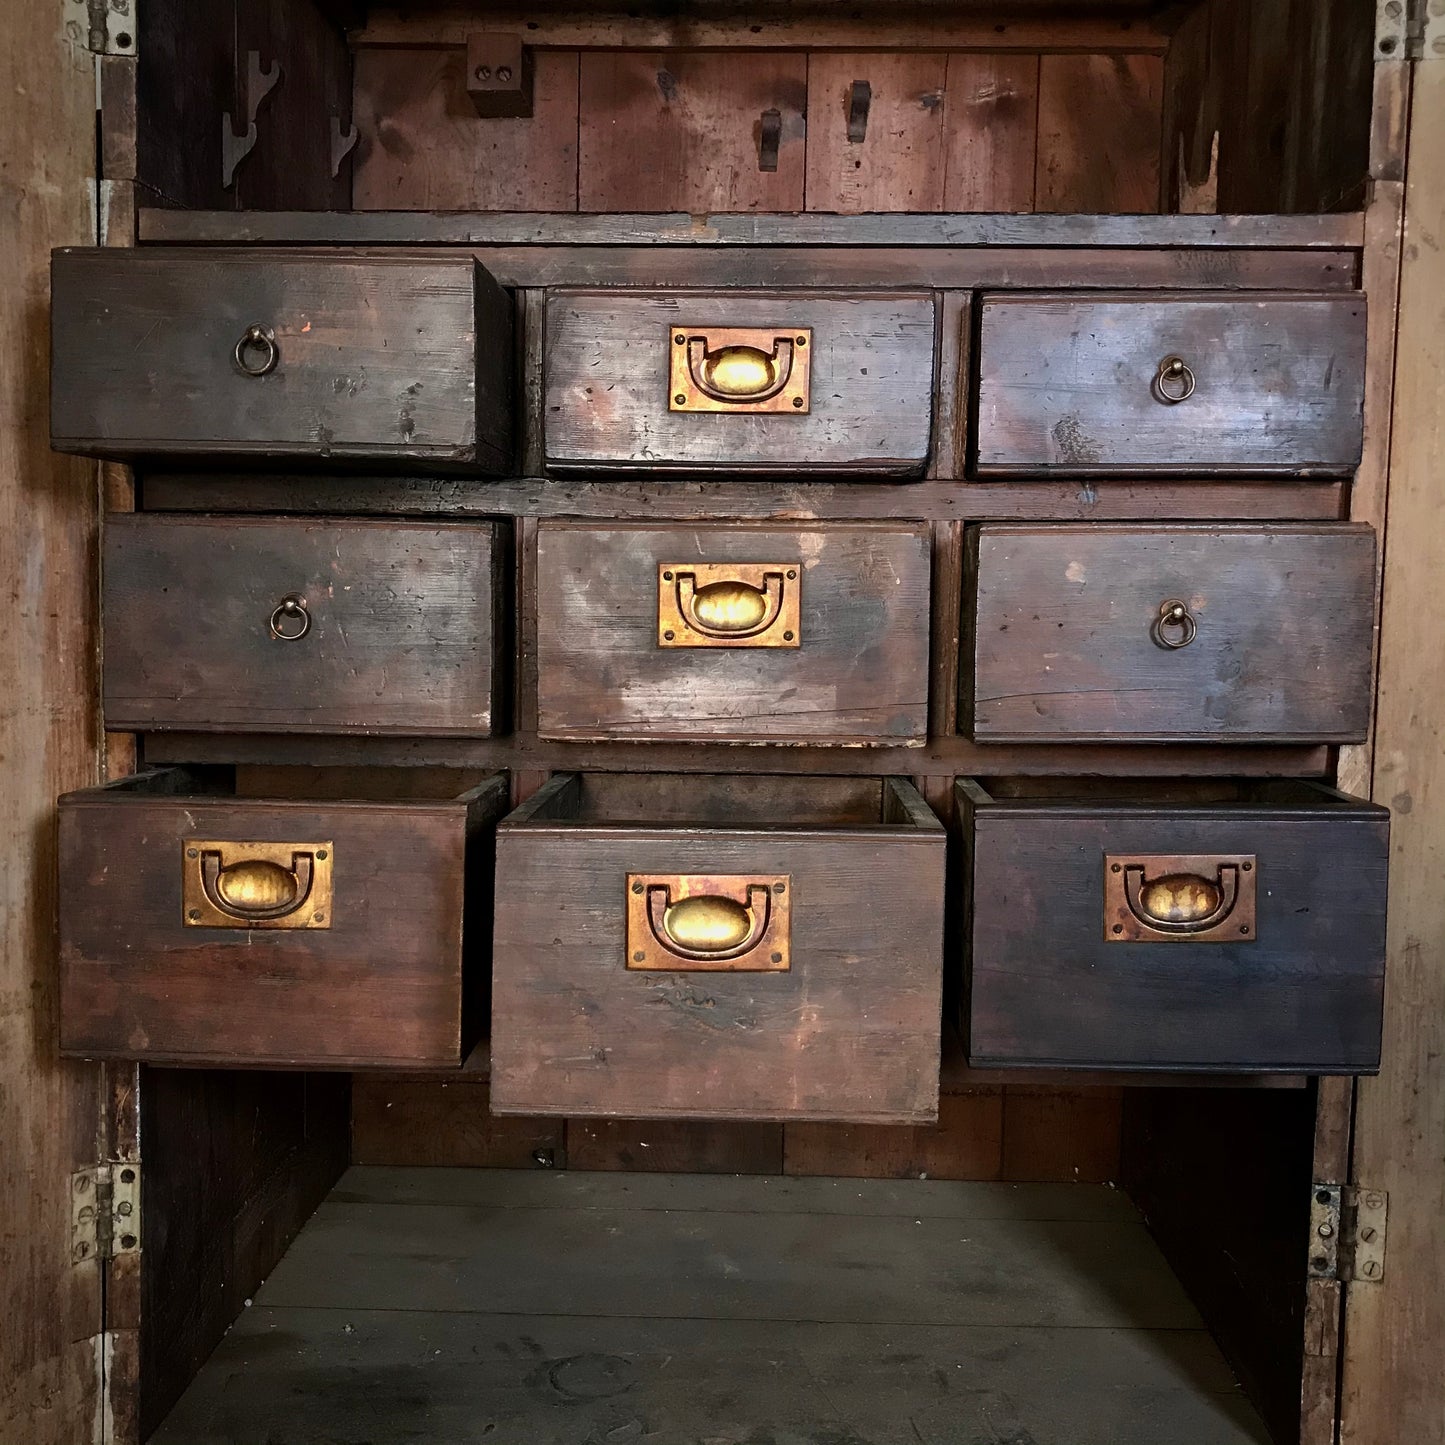 Livery Cupboard c.1860